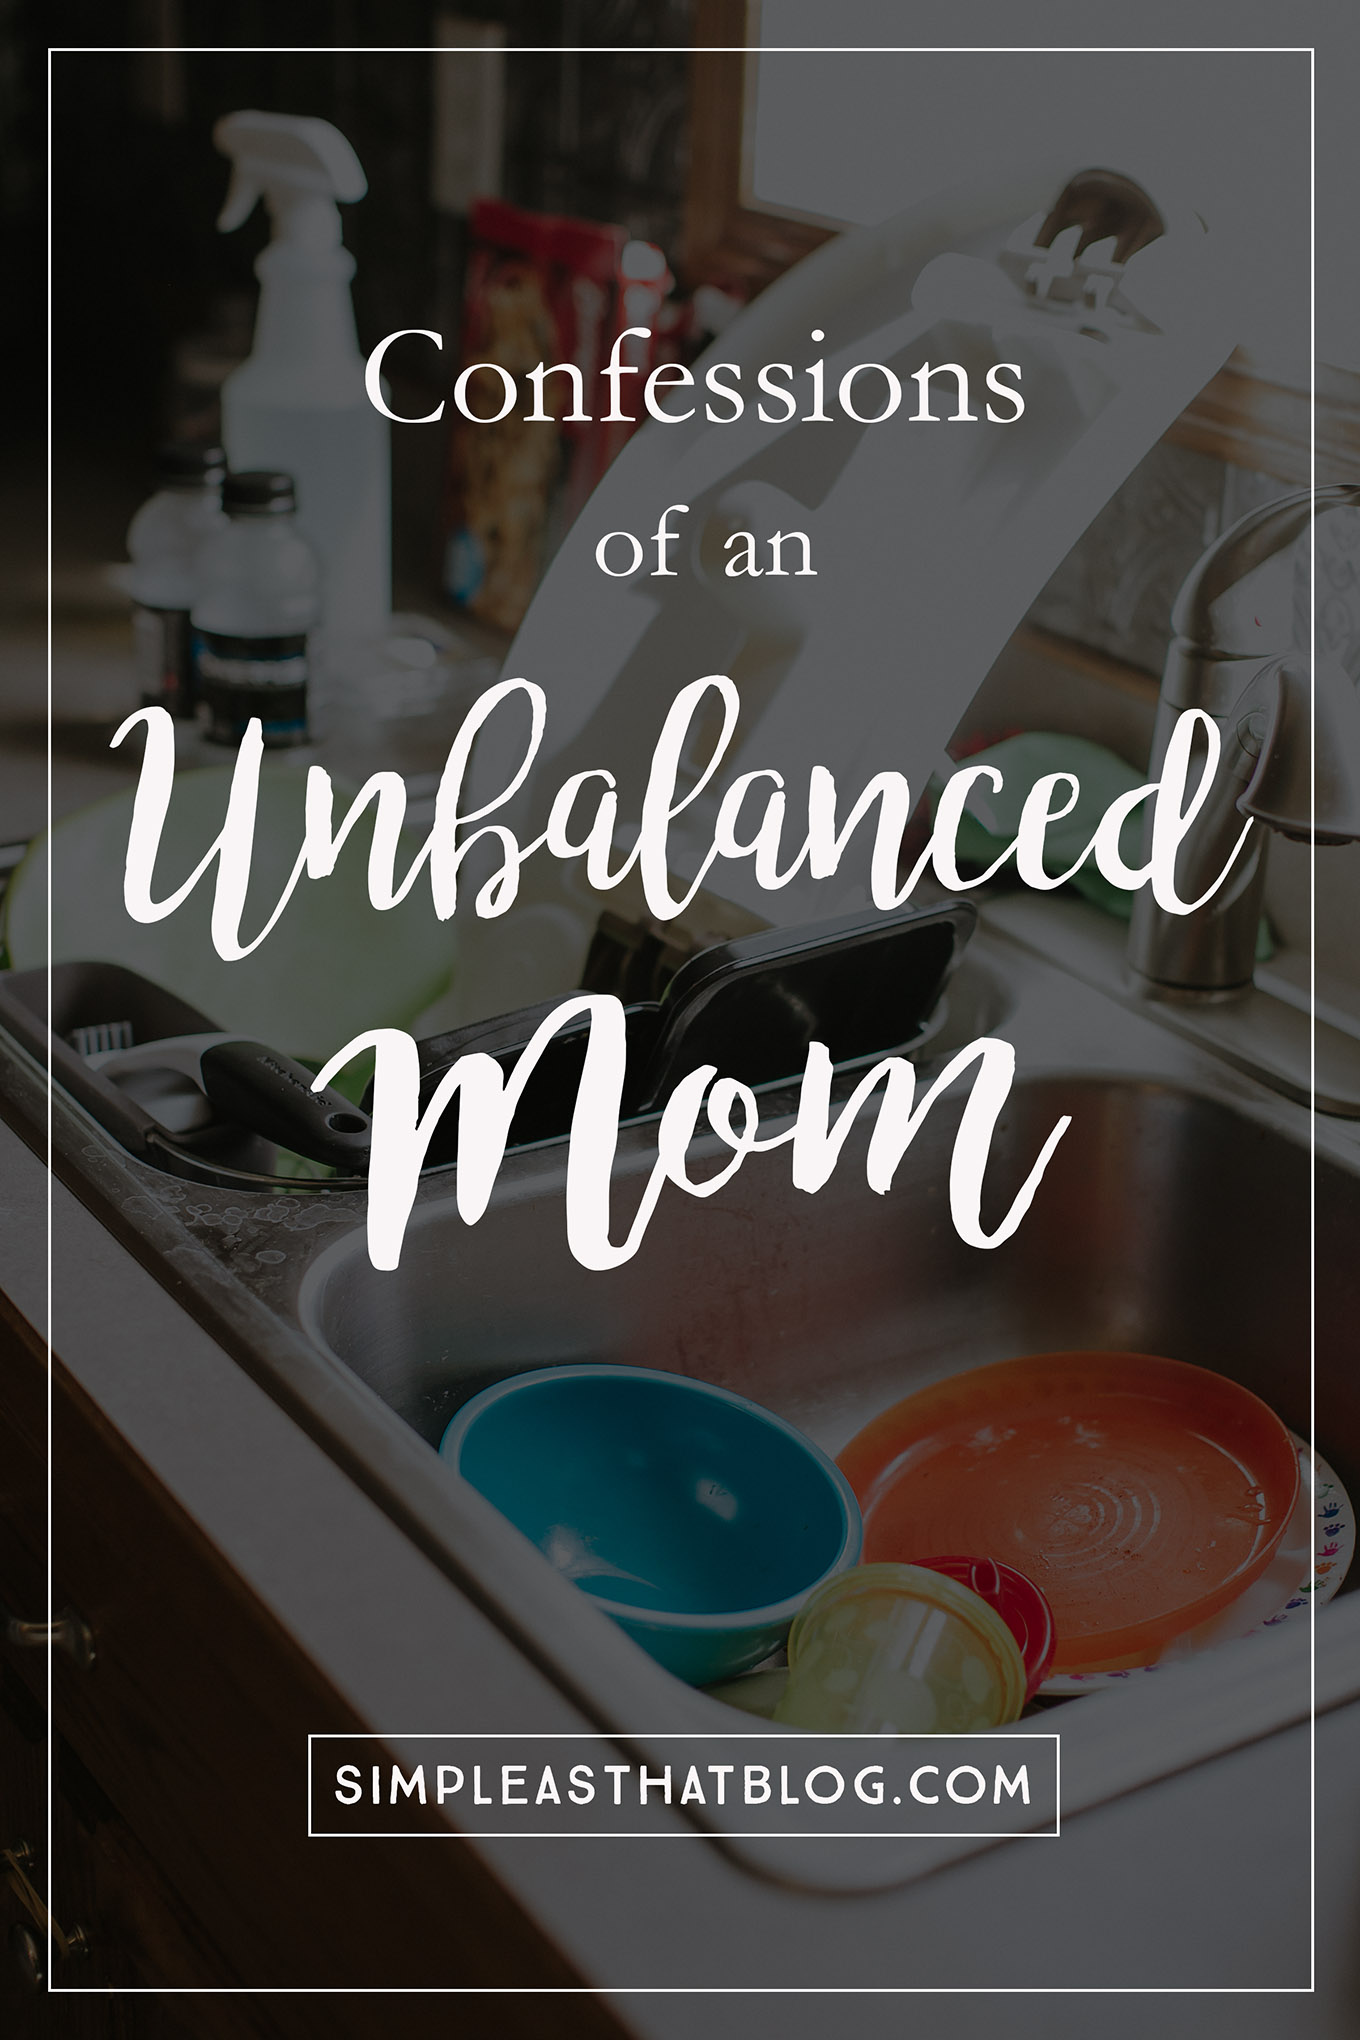 "I sat with my head in my hands, wondering how I'd gotten here." Confessions from an unbalanced mom—and the lessons that helped her find it.